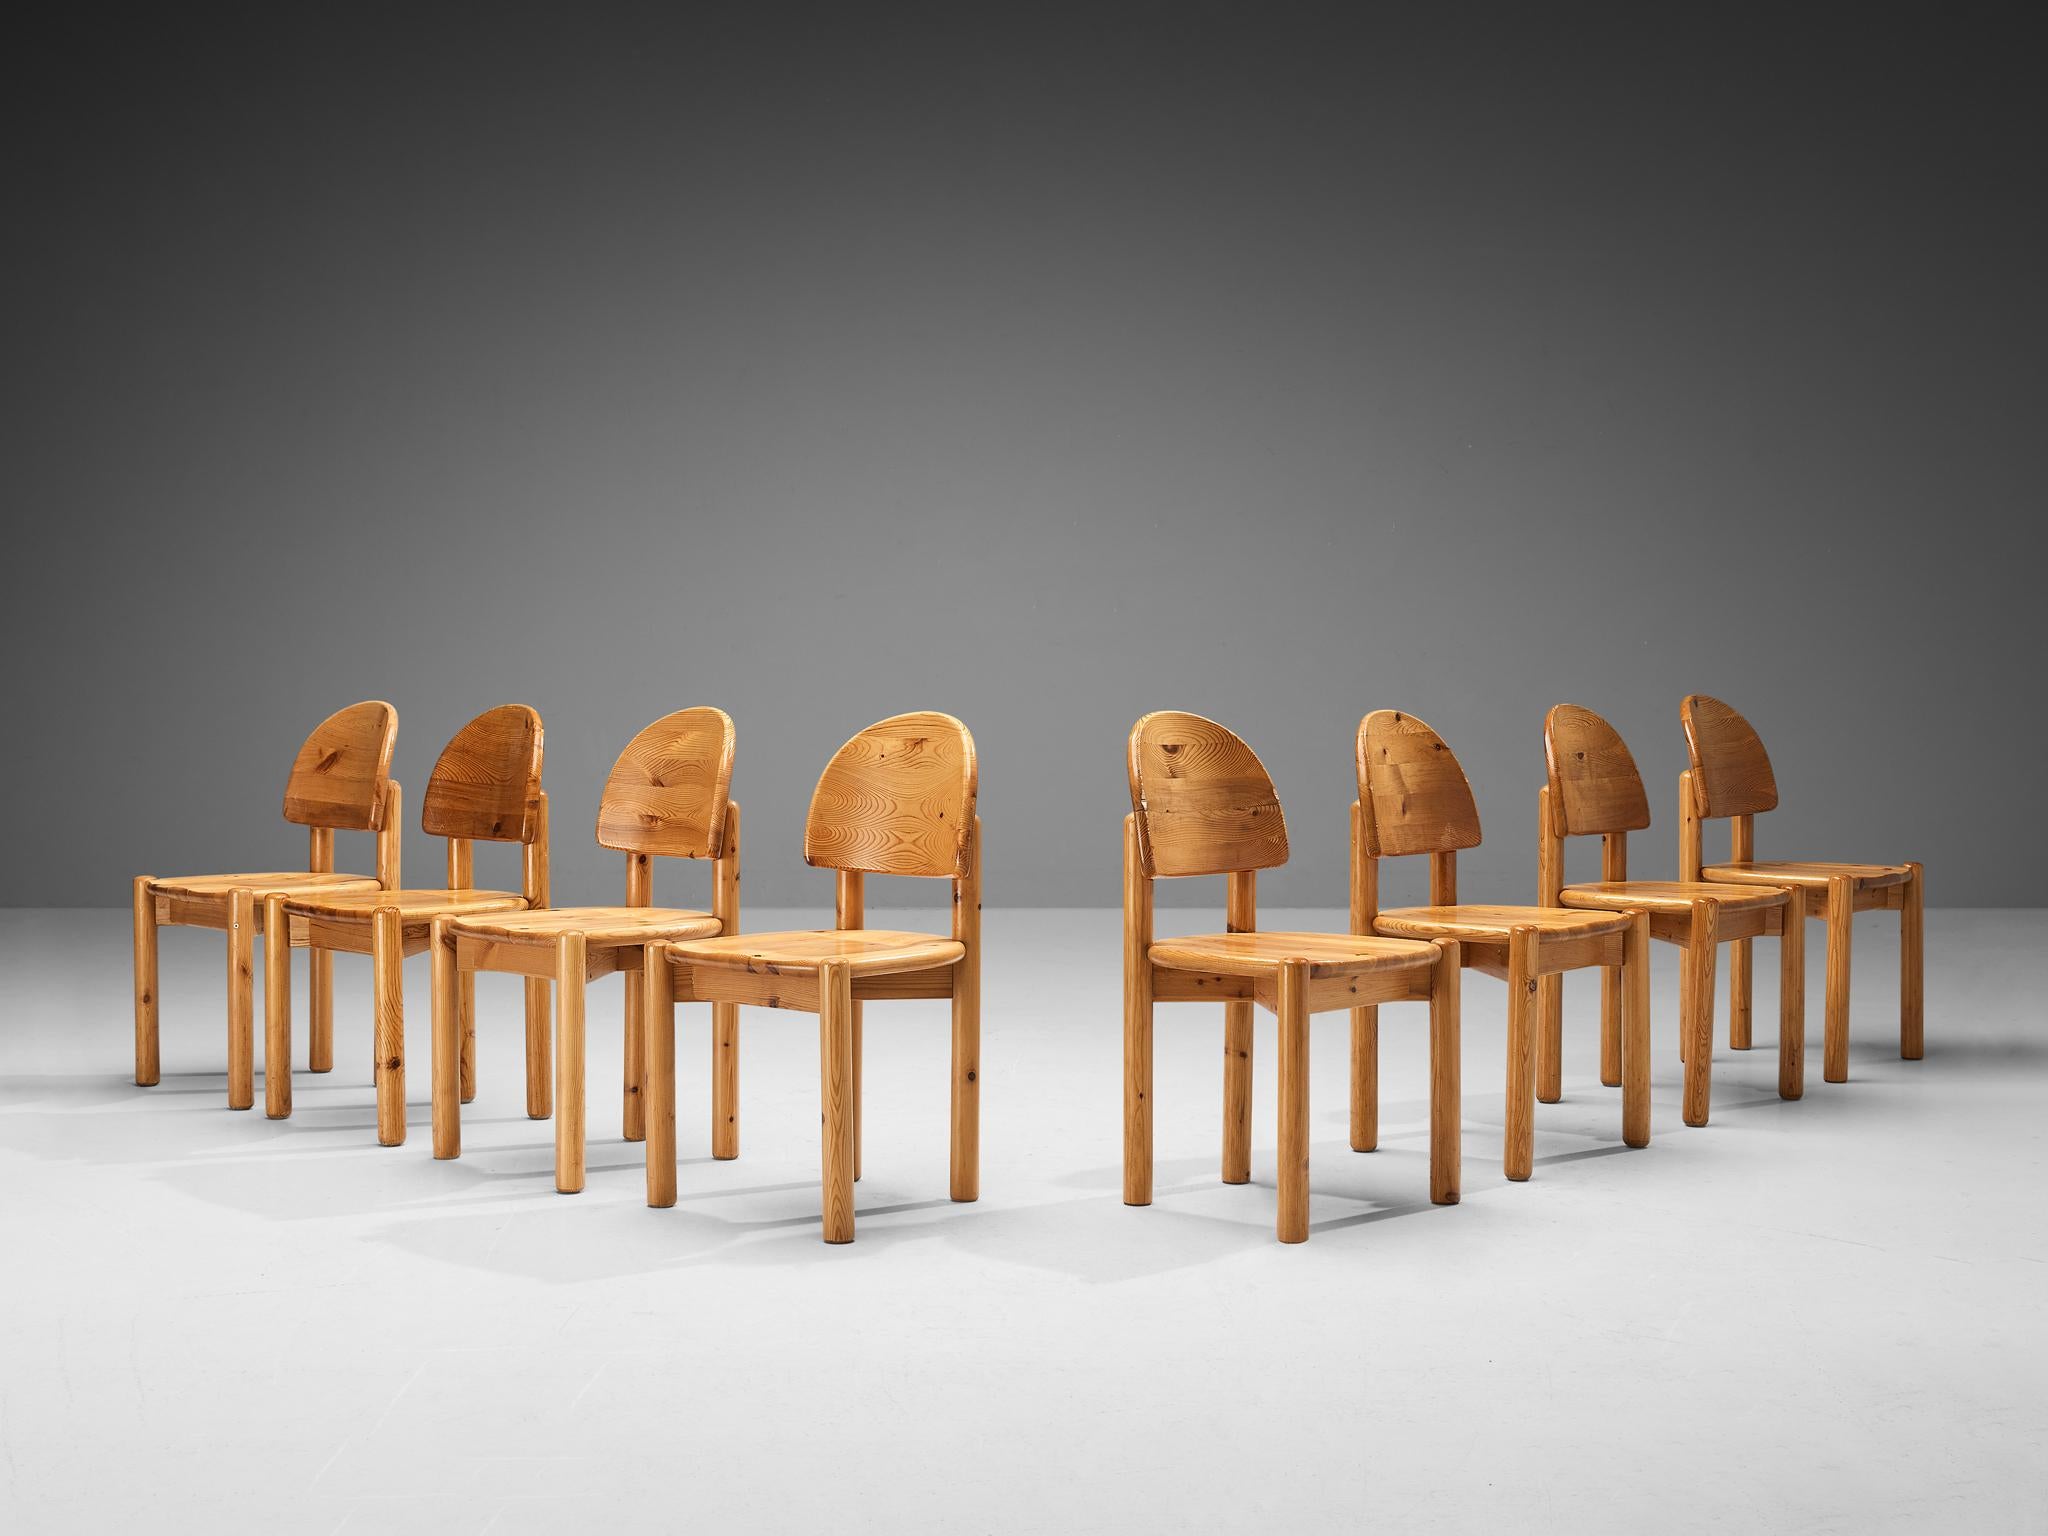 Rainer Daumiller for Hirtshals Sawmill, set of eight dining chairs, pine, Denmark, 1970s

Beautiful, organic and natural dining chairs in solid pine designed by Rainer Daumiller. A simplistic design with a round seating and attention for the natural